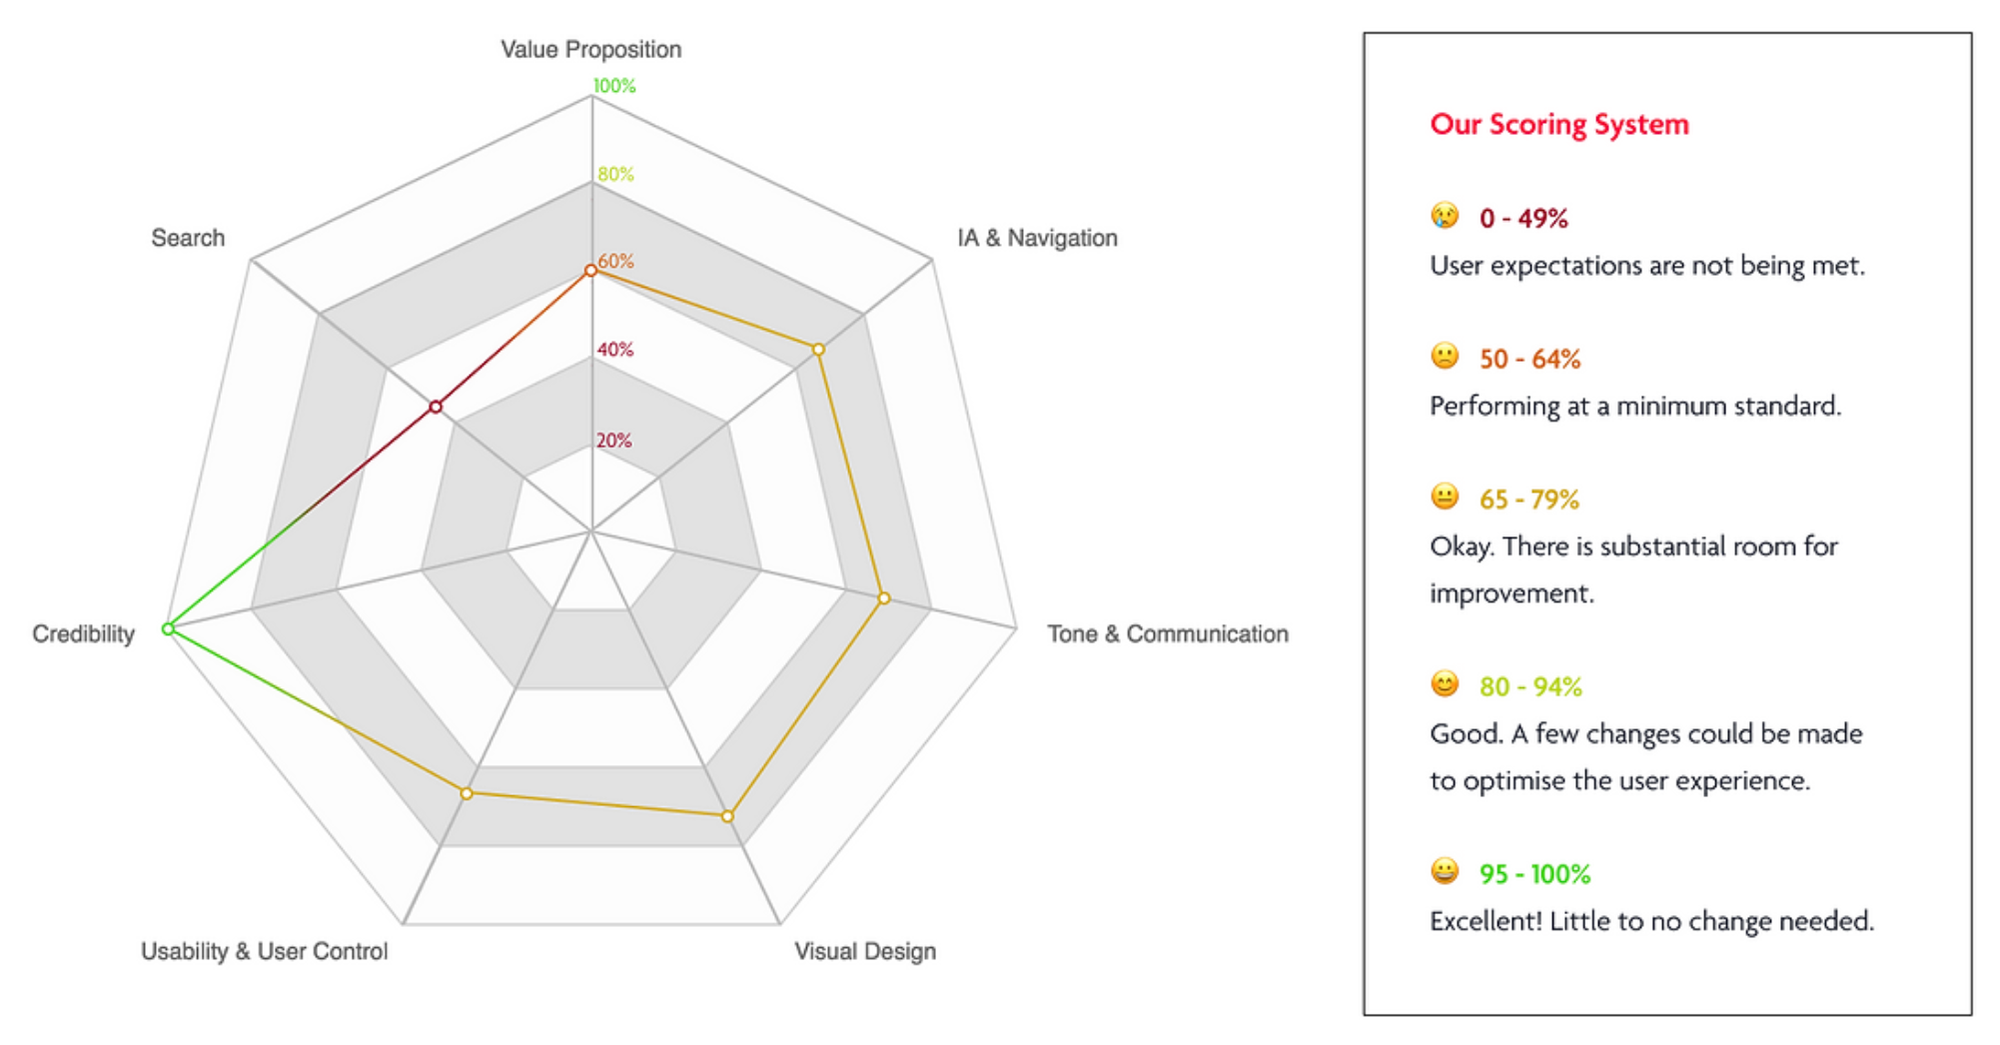 Figure 1: A radar chart showing how justinguitar.com scored in value proposition (60%), IA & navigation (63%), tone and communication (64%), visual design (67%), usability and user control (63%), credibility (100%) and search (44%).